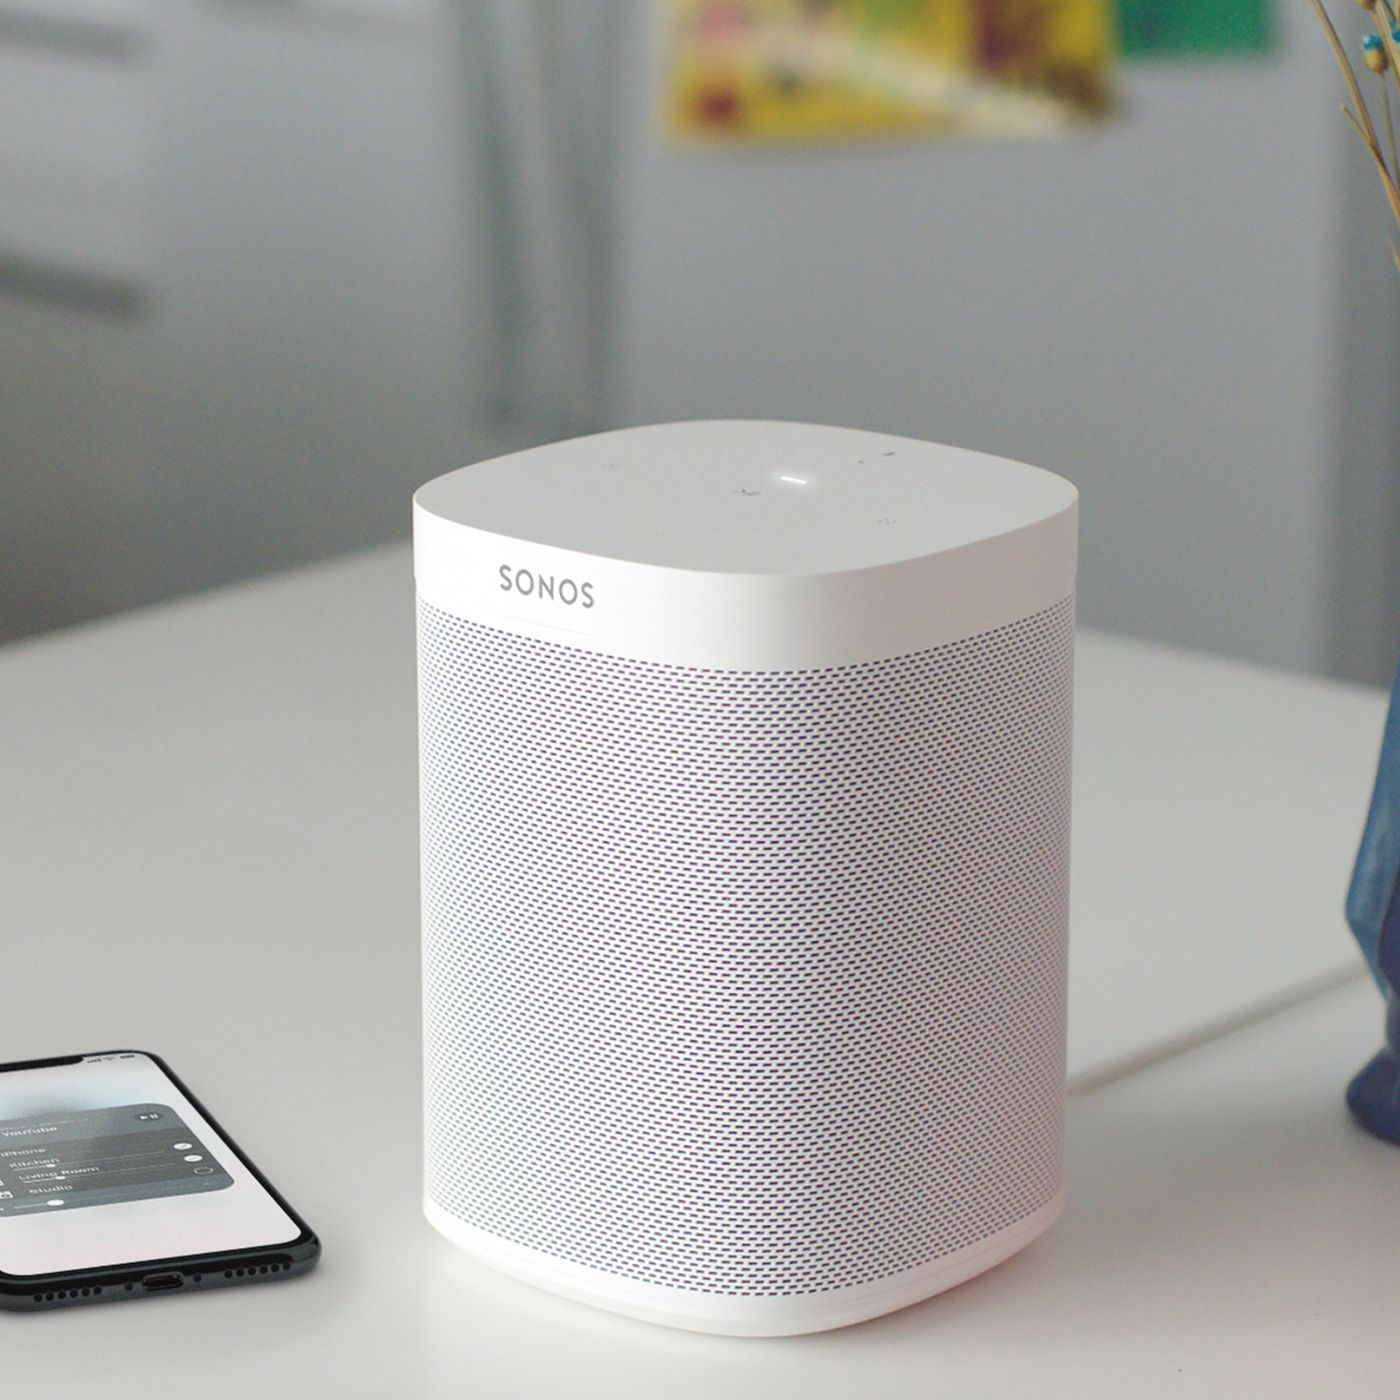 Kæreste Mirakuløs Layouten How to set up AirPlay on your Sonos speakers - The Verge